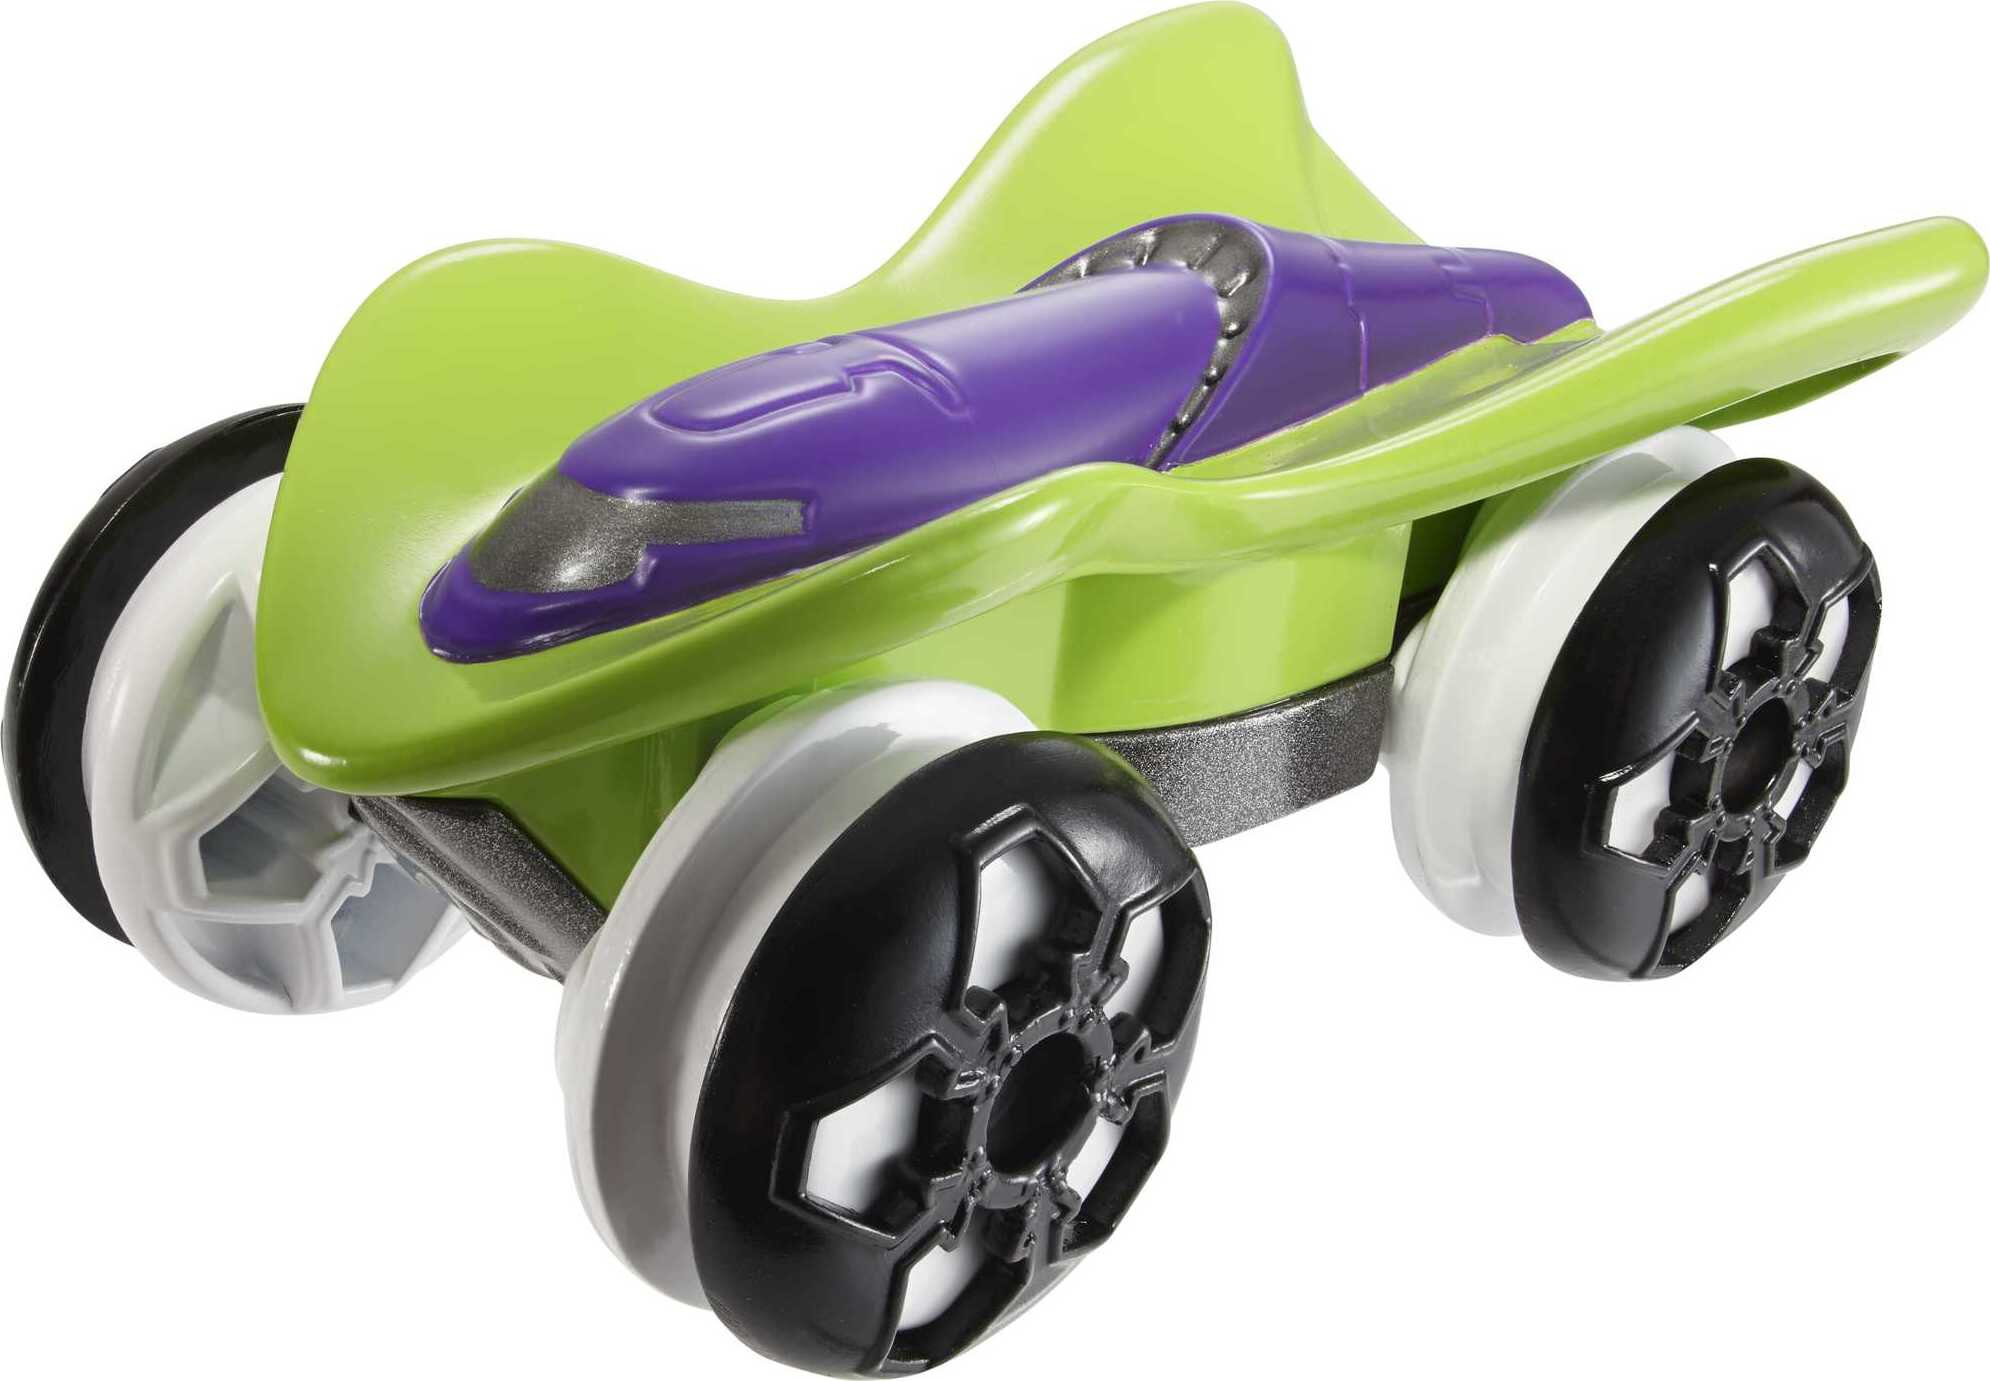 Hot Wheels Color Shifters 1:64 Scale Toy Car, Transforms Color in Water (Styles May Vary) - image 1 of 7